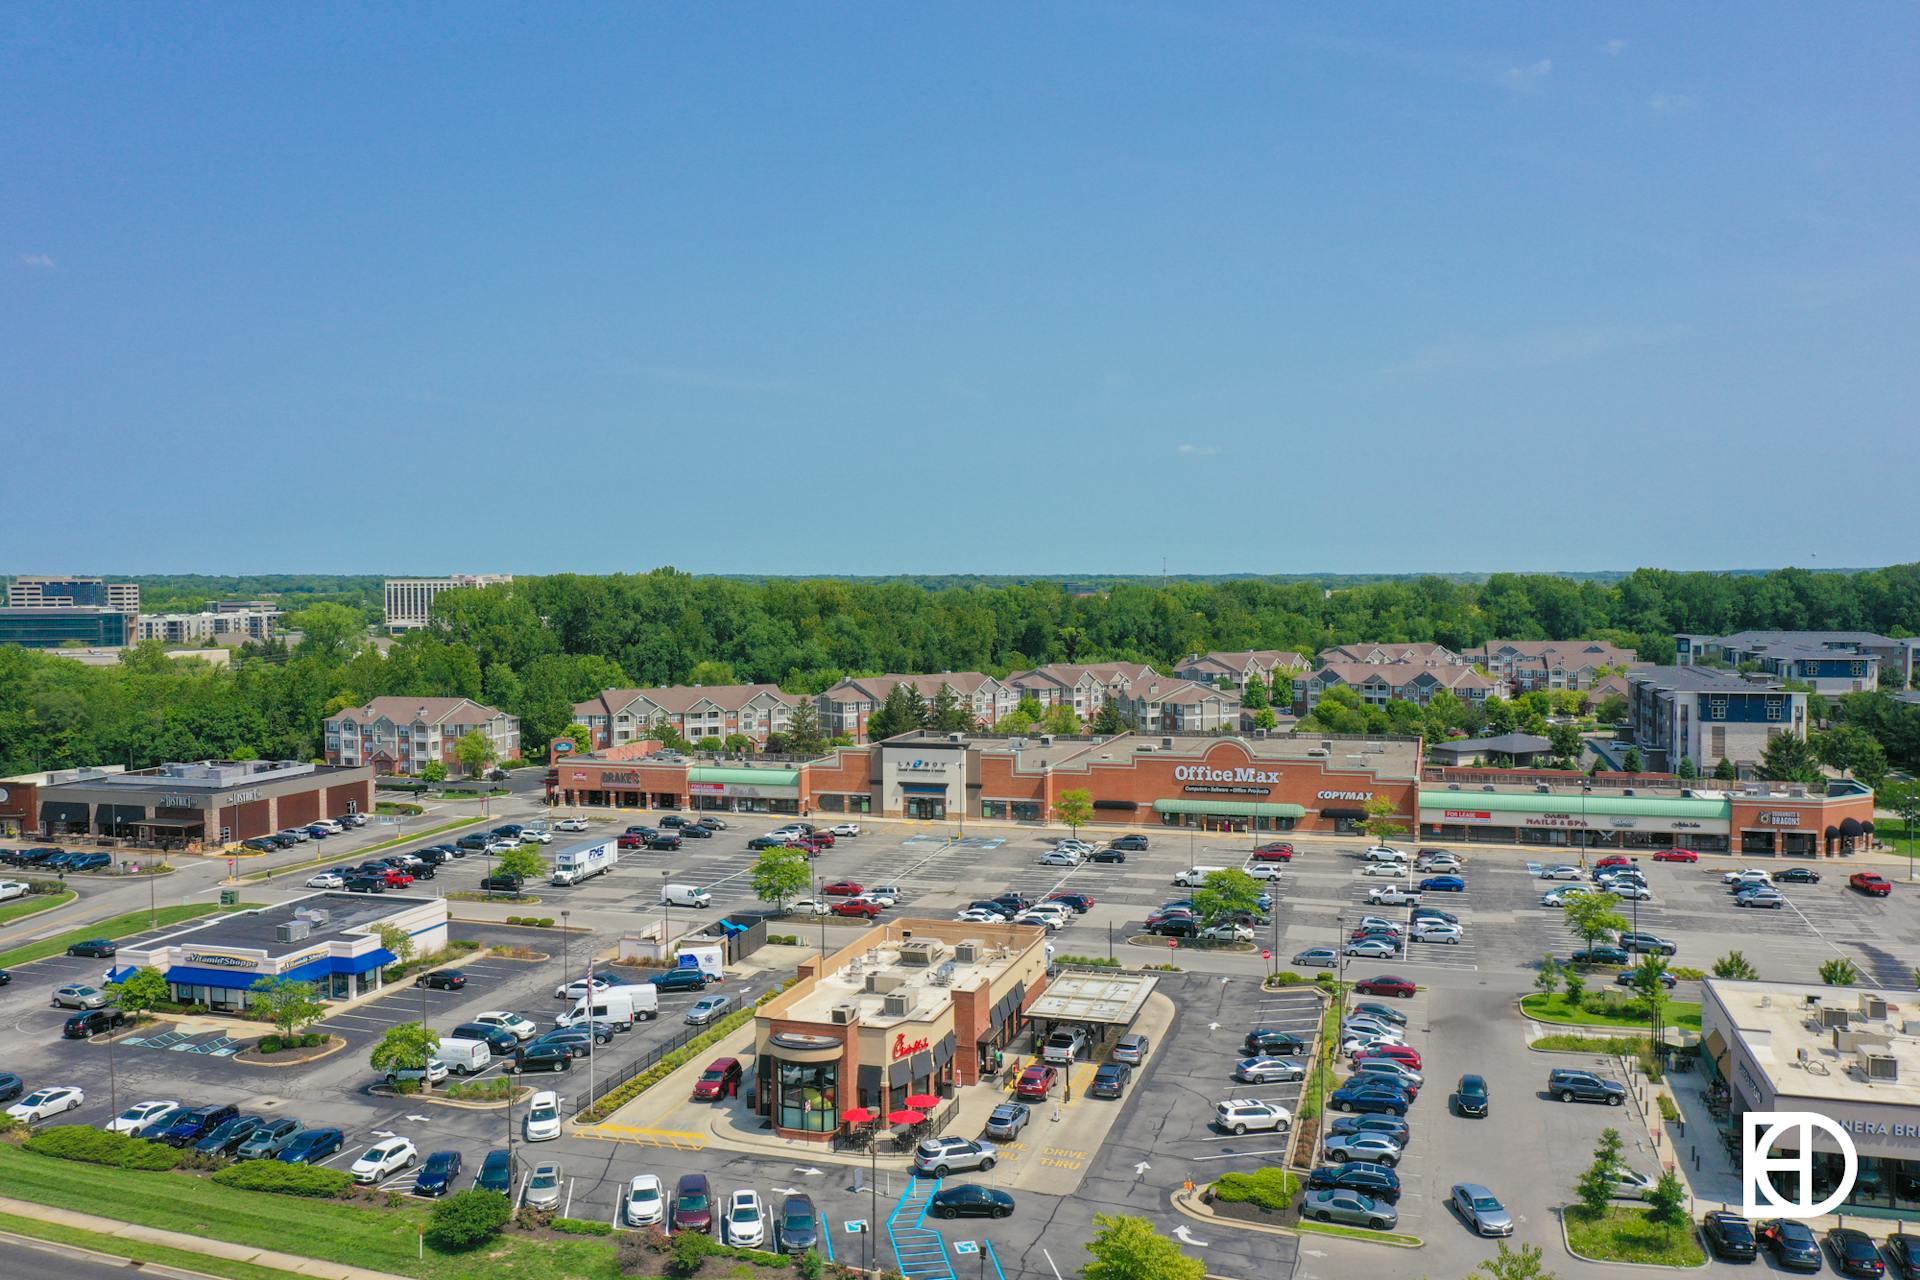 Photo of Clearwater Crossing Shopping Center, showing LaZBoy, Chik-Fil-A, etc